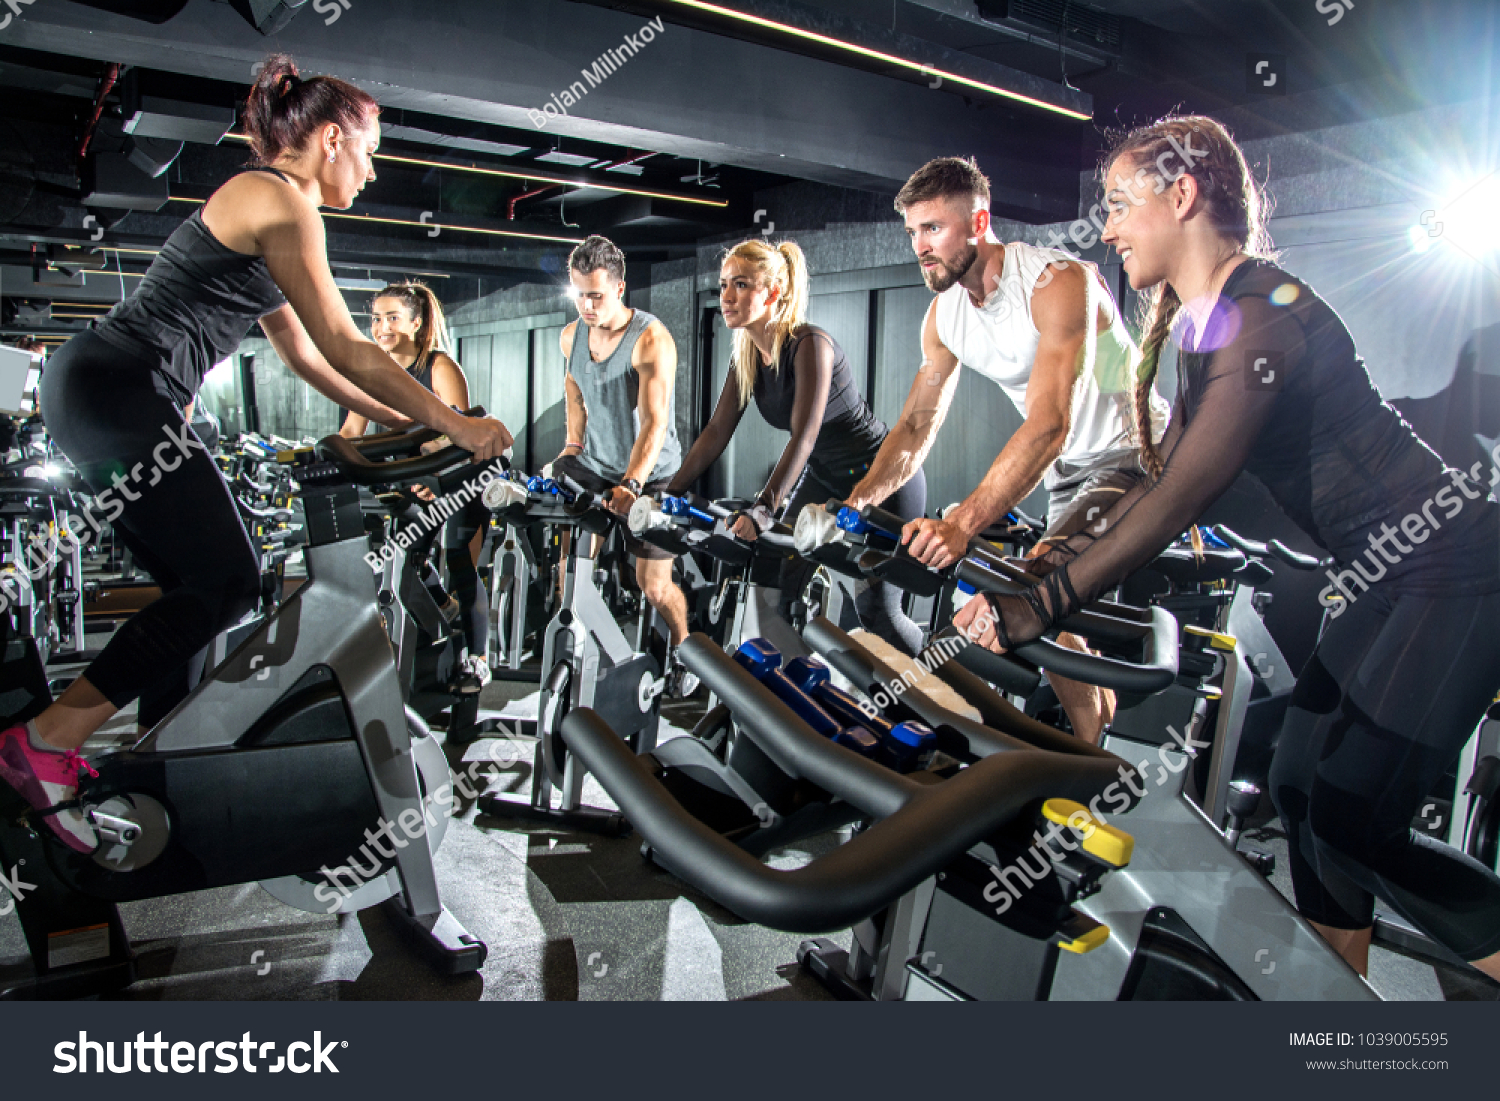 Group of sporty women and men training on exercise bikes together at gym. #1039005595